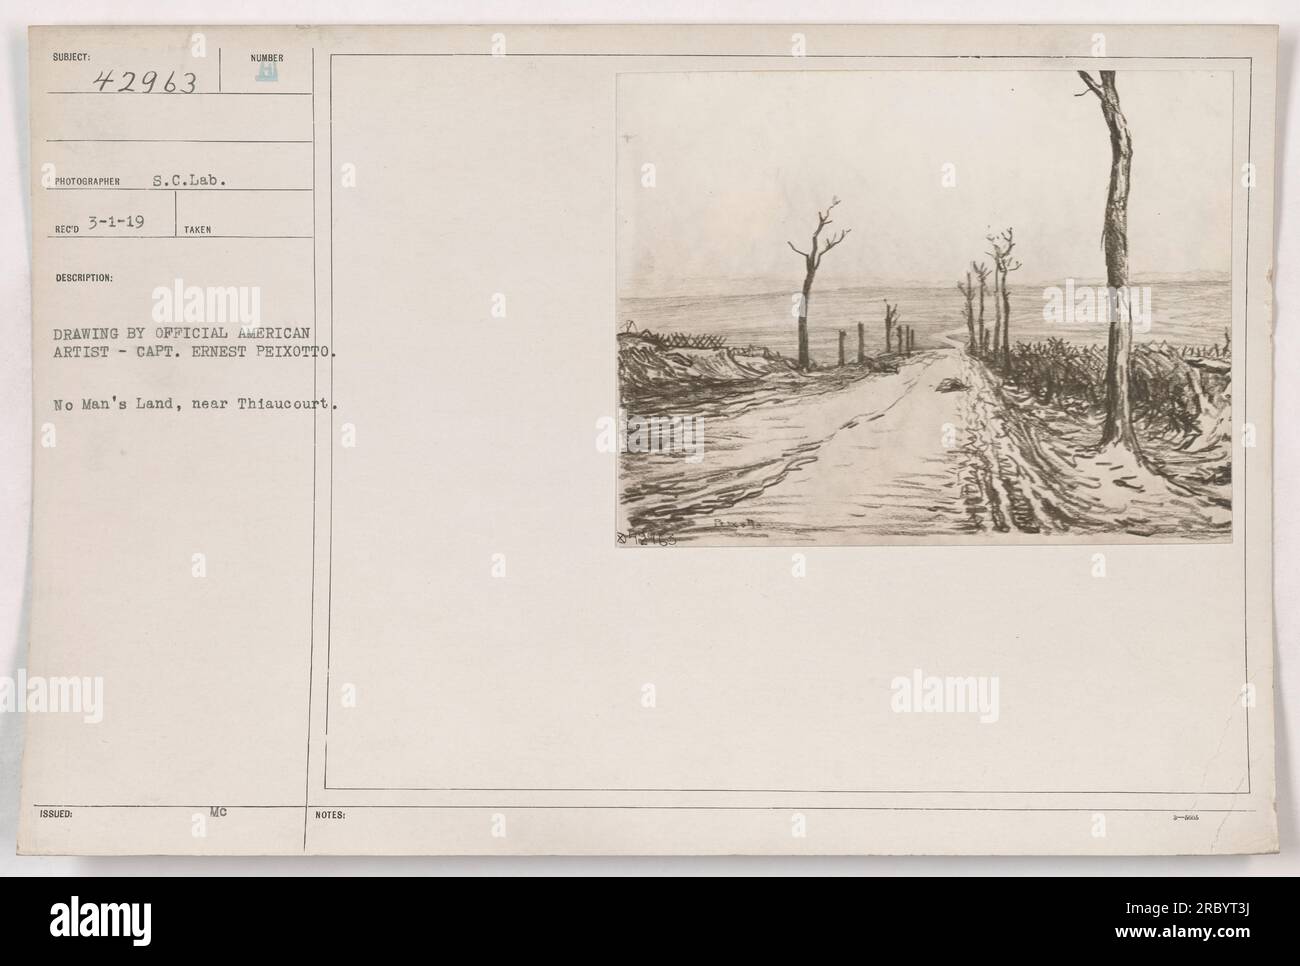 A photograph taken near Thiaucourt, France, shows No Man's Land during World War One. The image was captured by S.C.Lab. Rico on 3-1-19, using an issued drawing created by American artist Capt. Ernest Peixotto. Stock Photo